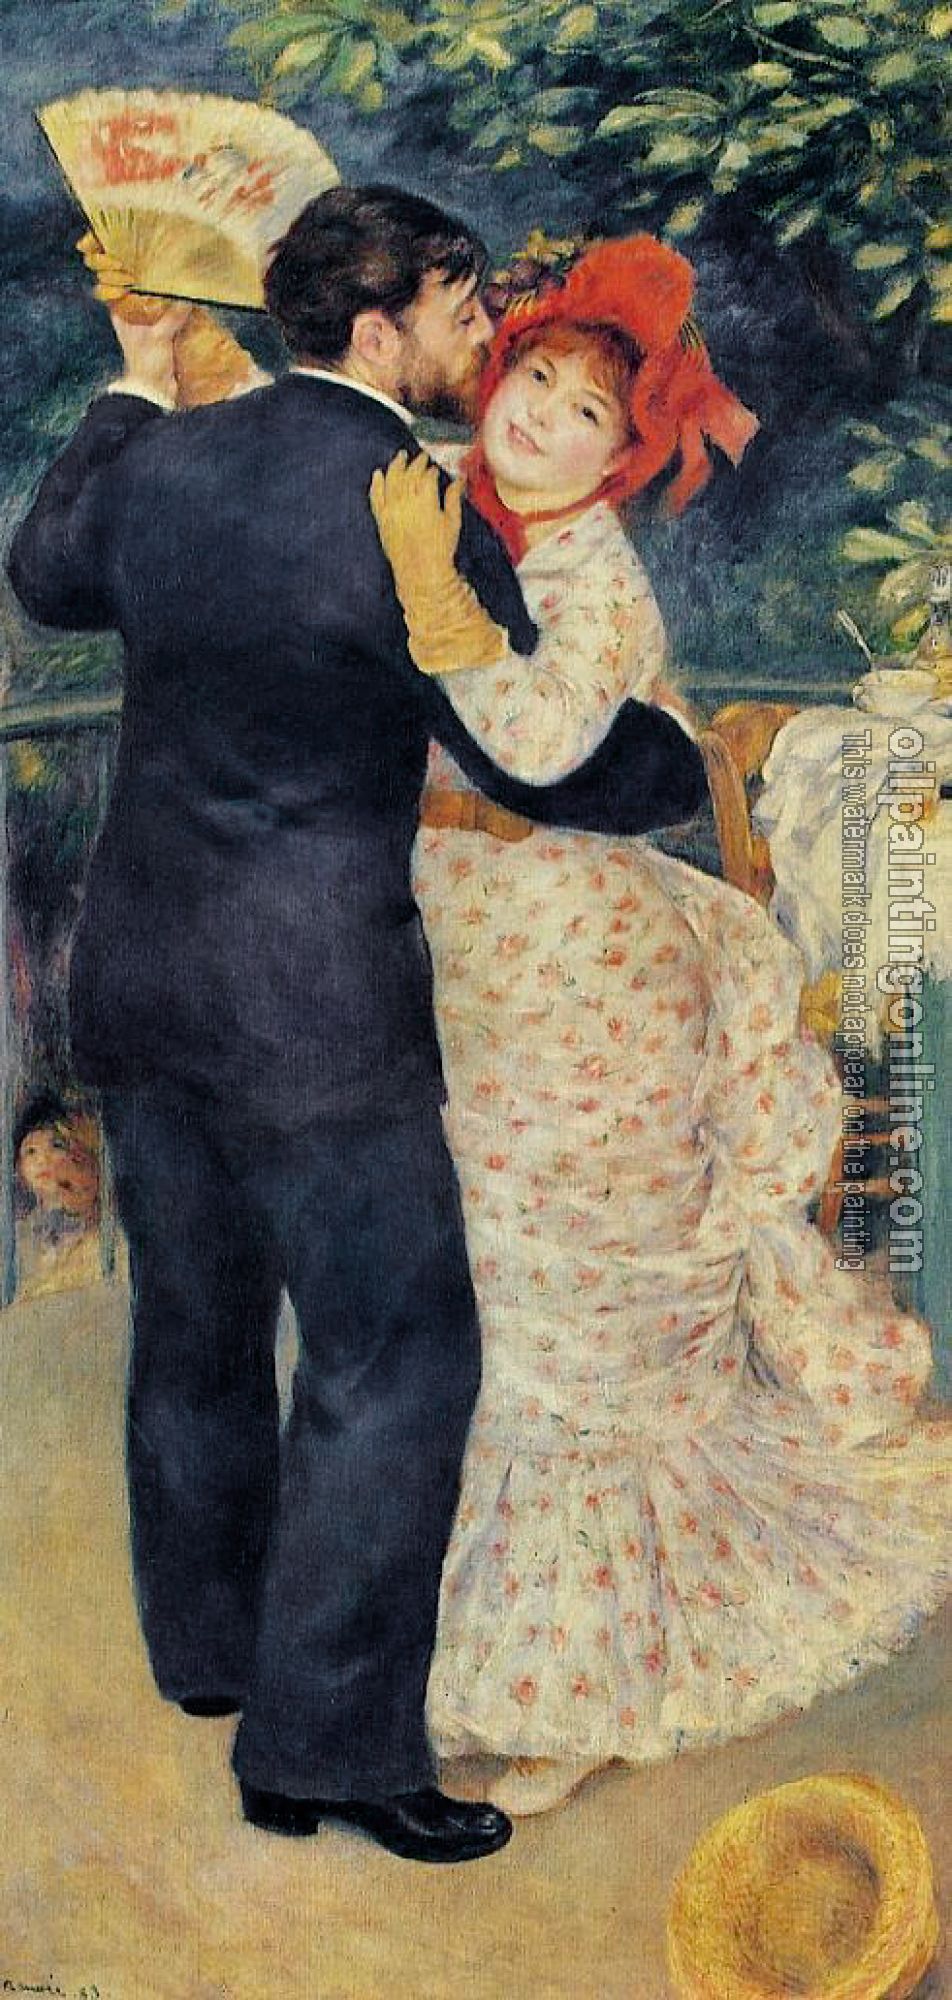 Renoir, Pierre Auguste - Dance in the Country